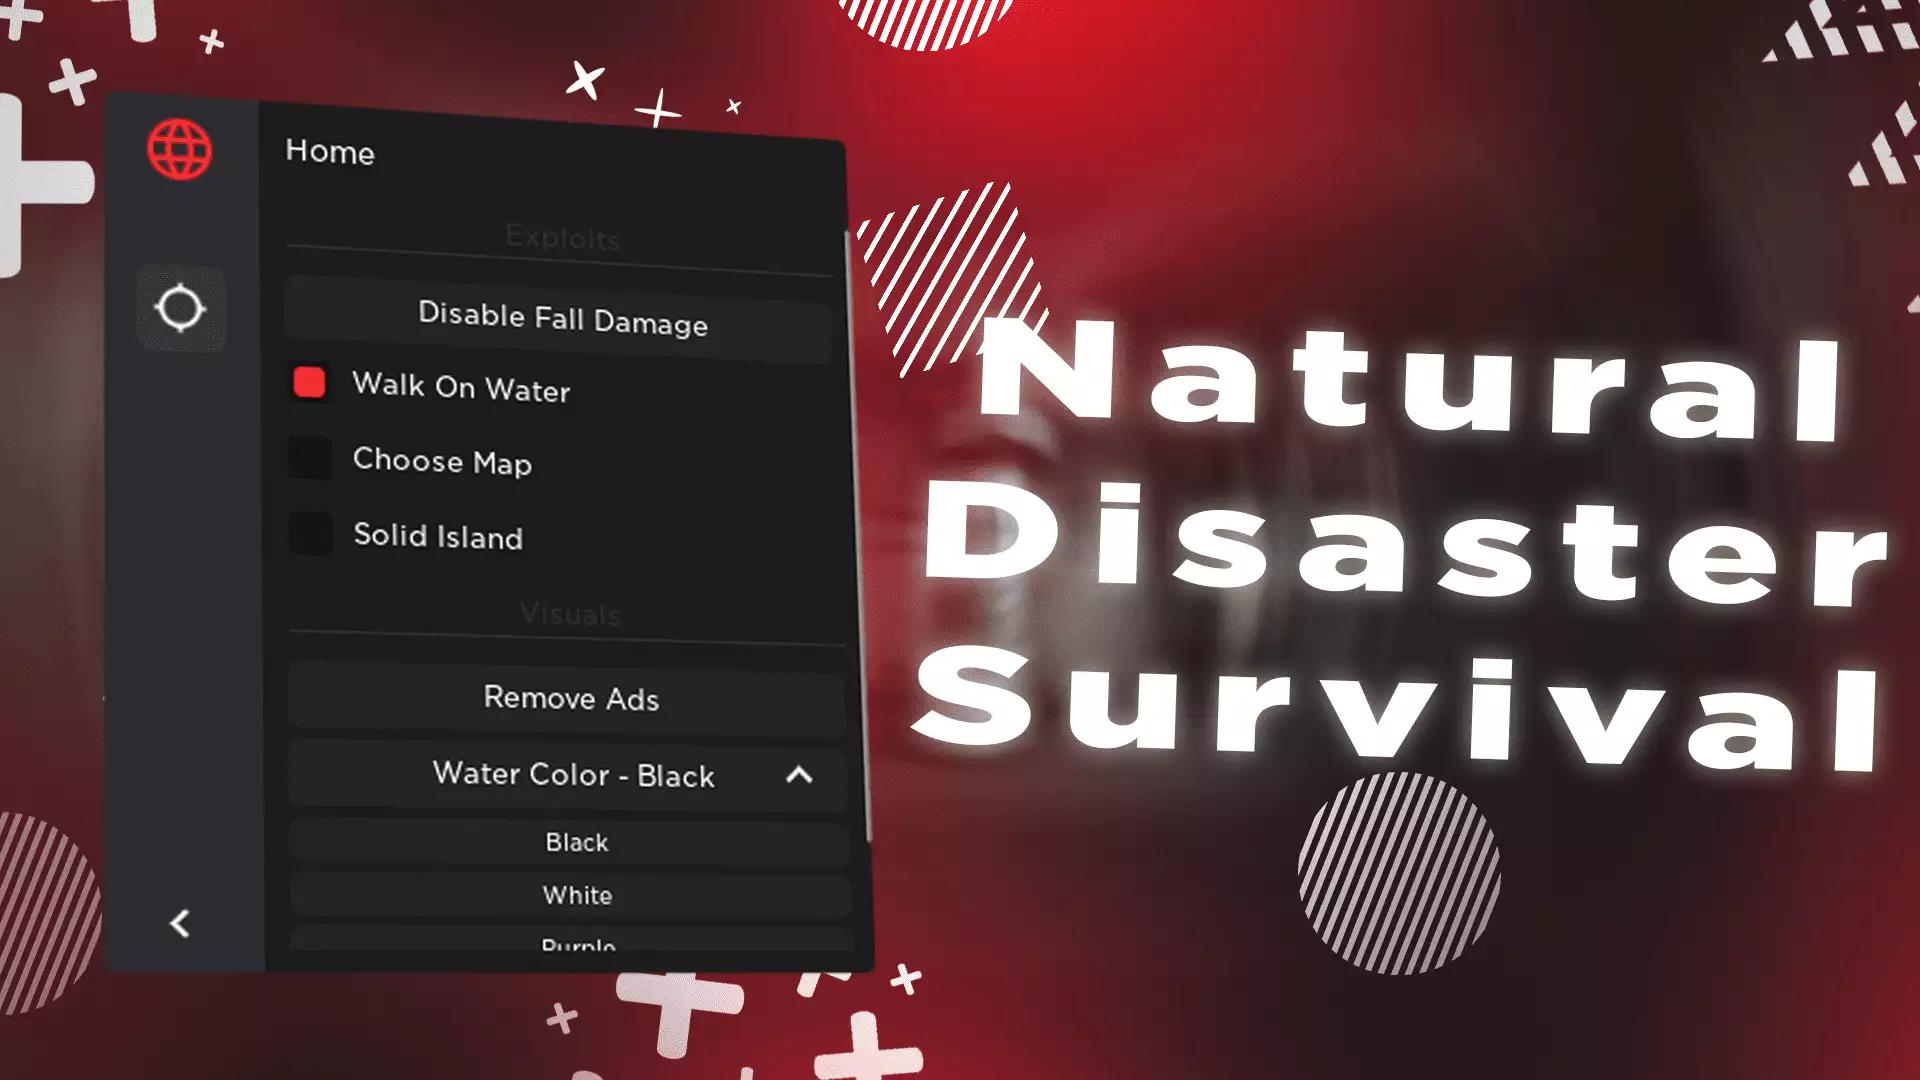 Preview of Natural Disaster Survival - Disable fall damage, Walk On Water, Choose Map